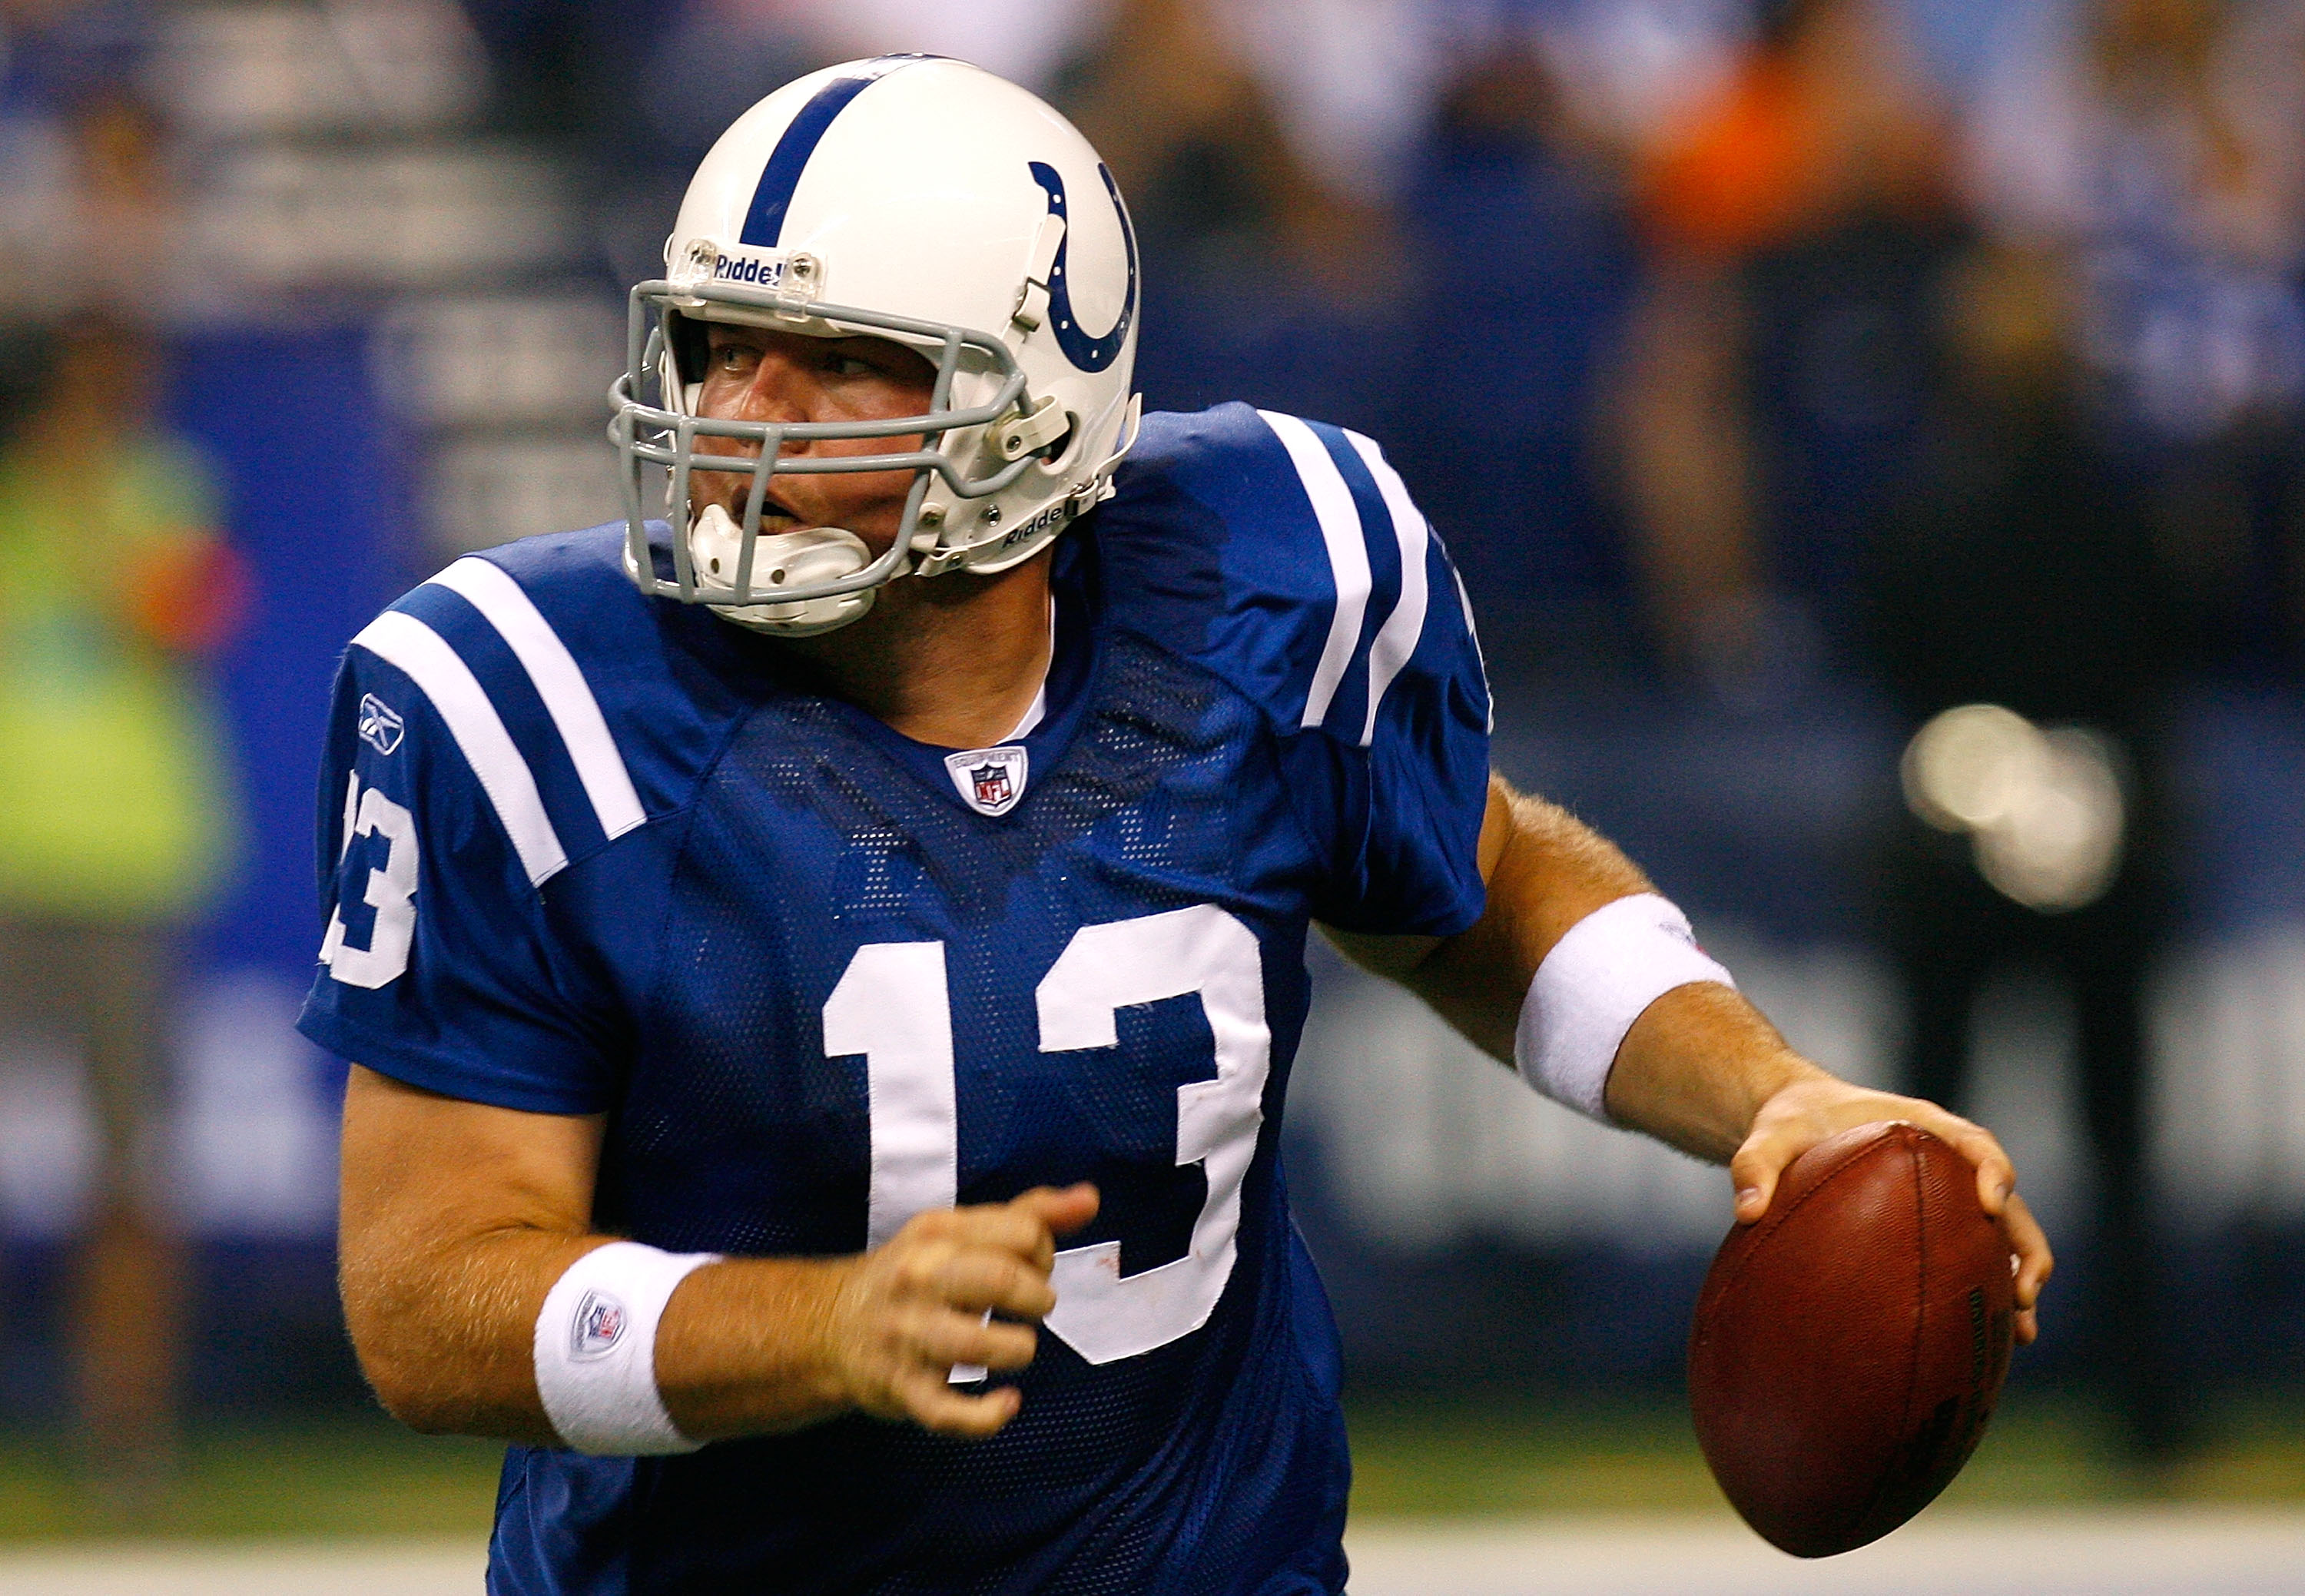 INDIANAPOLIS - AUGUST 28:  Backup quarterback Jared Lorenzen #13 of the Indianapolis Colts against the Cincinnati Bengals during the game at Lucas Oil Stadium on August 28, 2008 in Indianpolis, Indiana.  (Photo by Kevin C. Cox/Getty Images)